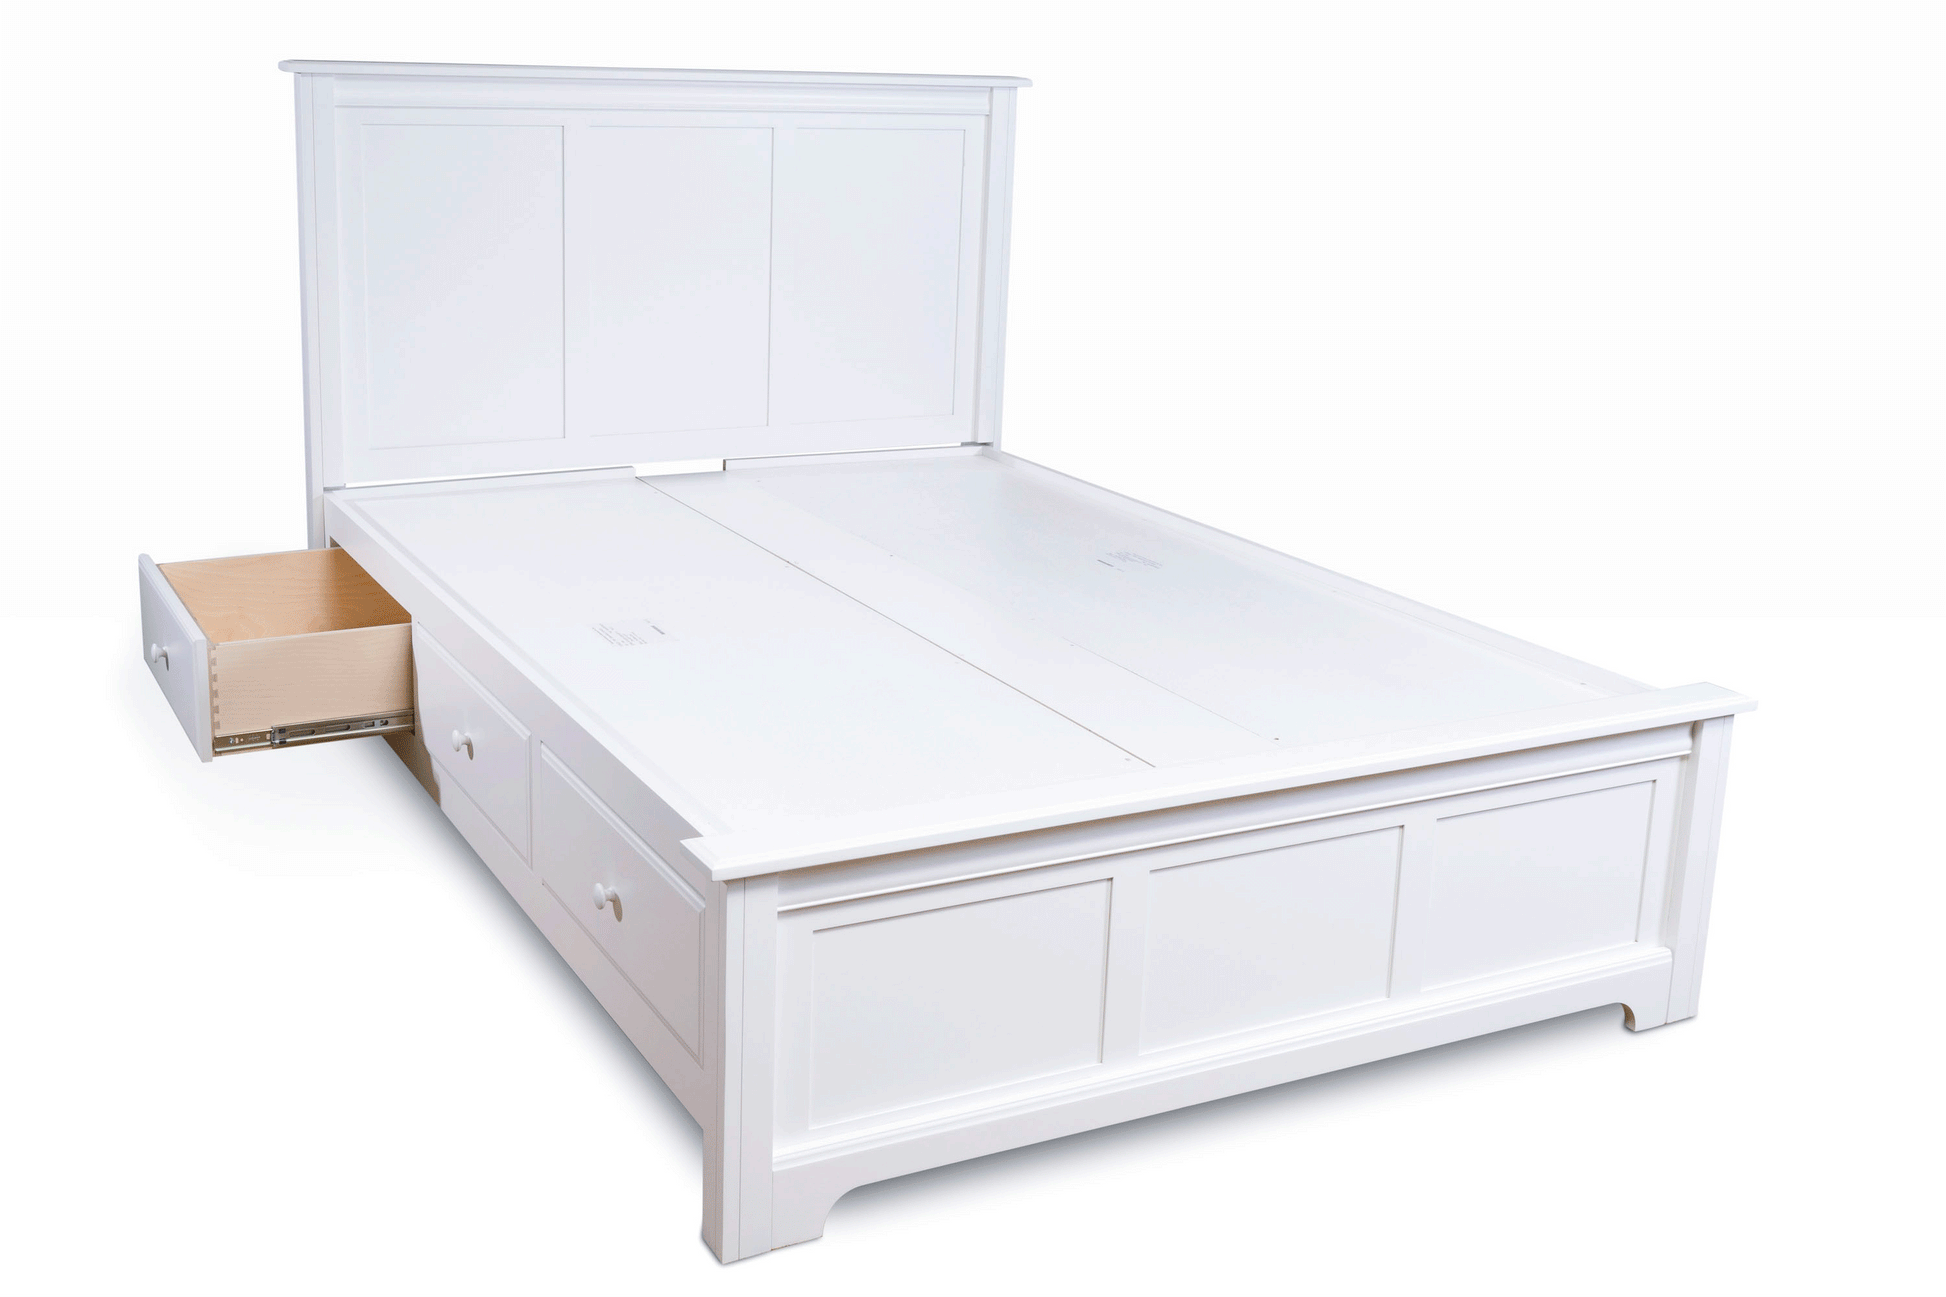 Acadia Madison Storage Bed with three drawers on either side, shown without mattress and in White finish. Drawers opened to show storage capacity.